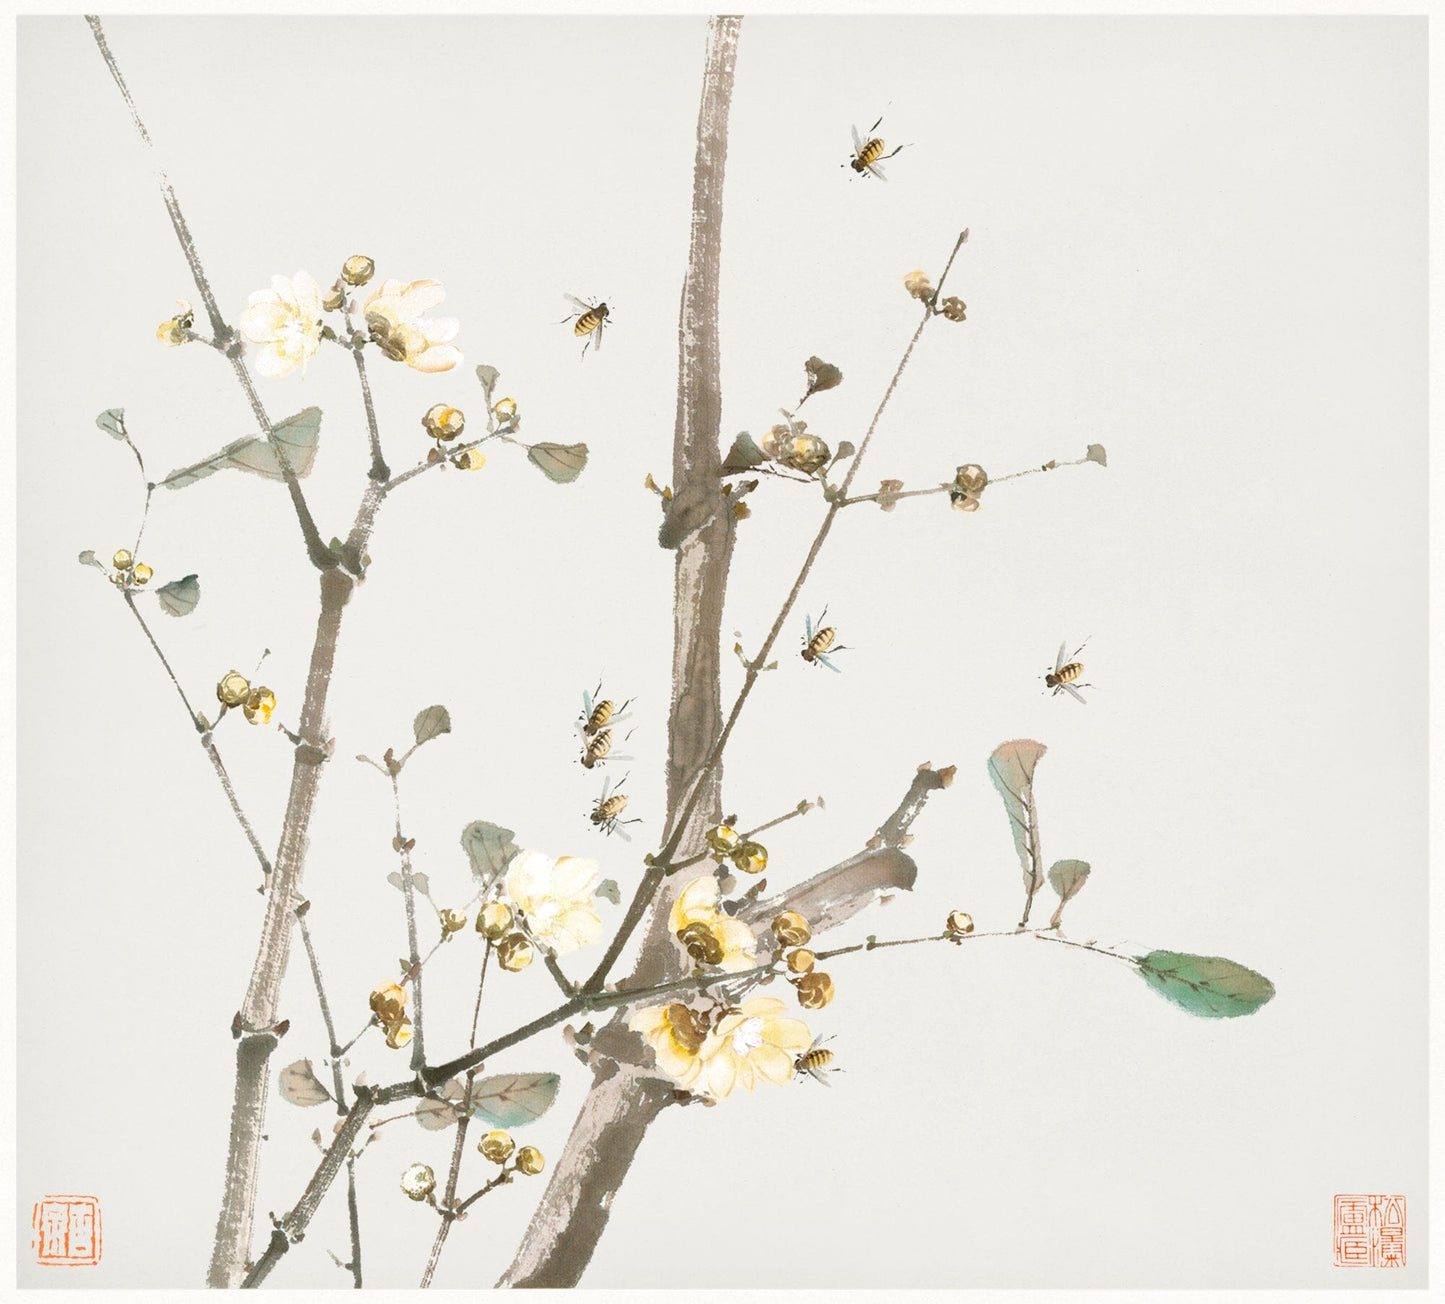 Bees and flowers | Bee prints | Ju Lian (1600s Qing dynasty) Posters, Prints, & Visual Artwork The Trumpet Shop   